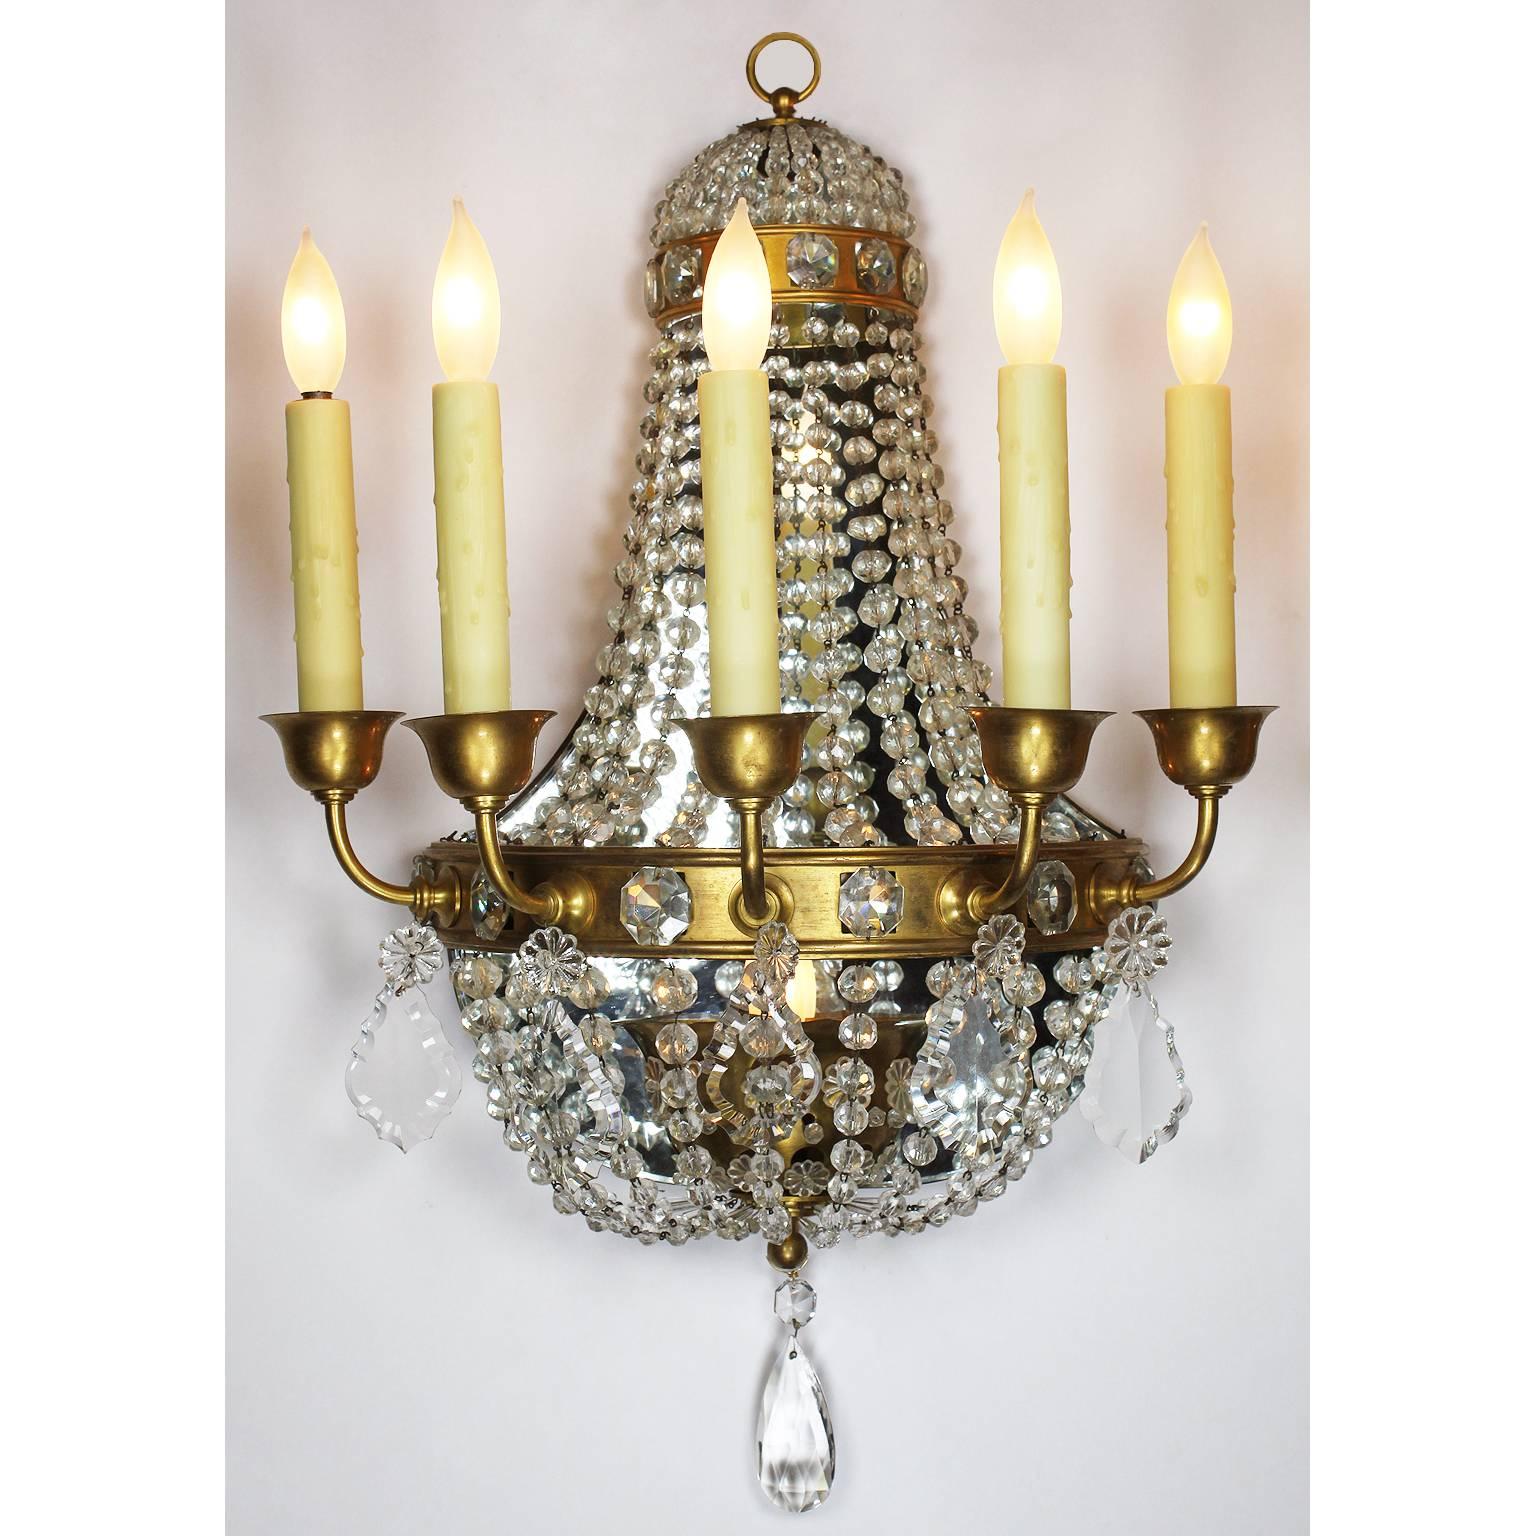 A fine pair of French neoclassical Revival Louis XVI style gilt bronze and cut-glass six-light wall sconces. The semi-circular gilt bronze frame surmounted with five candle-light cups, strands of diamond shaped cut-glass in the shape of a basket and